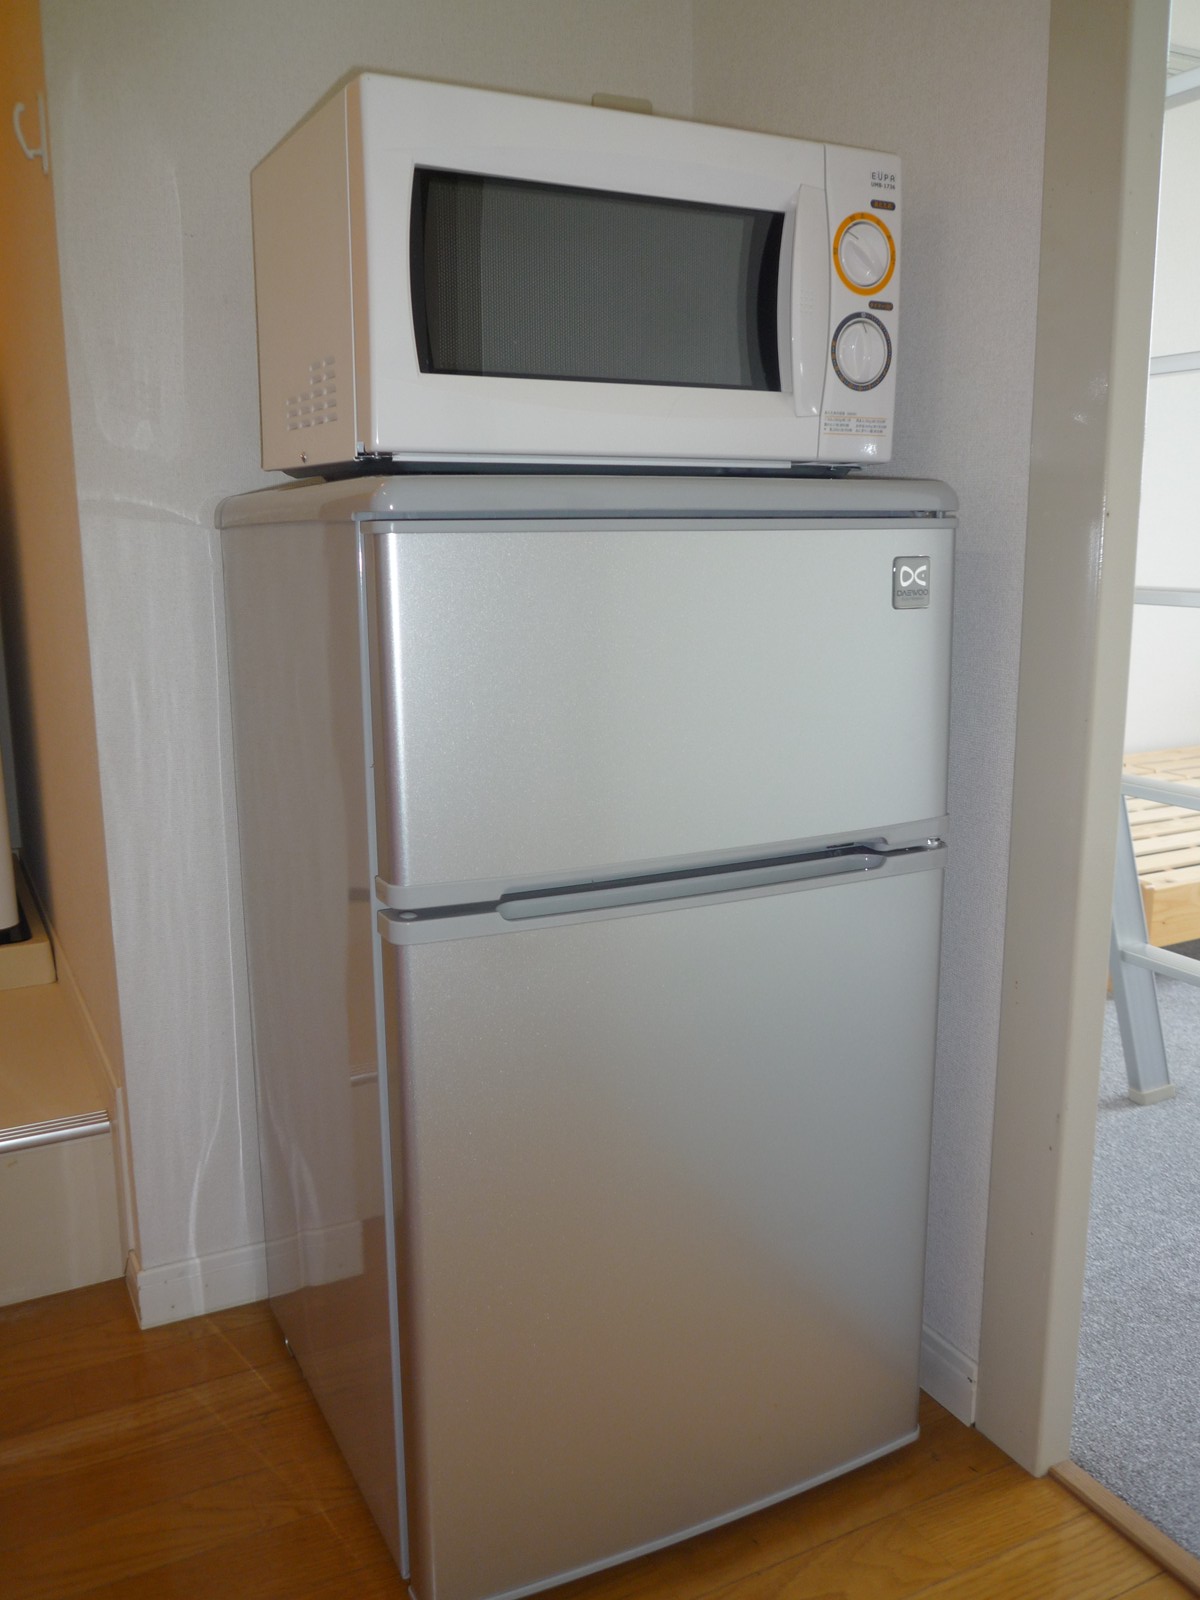 Other Equipment. Also it comes with a microwave and refrigerator ※ Specifications are different room